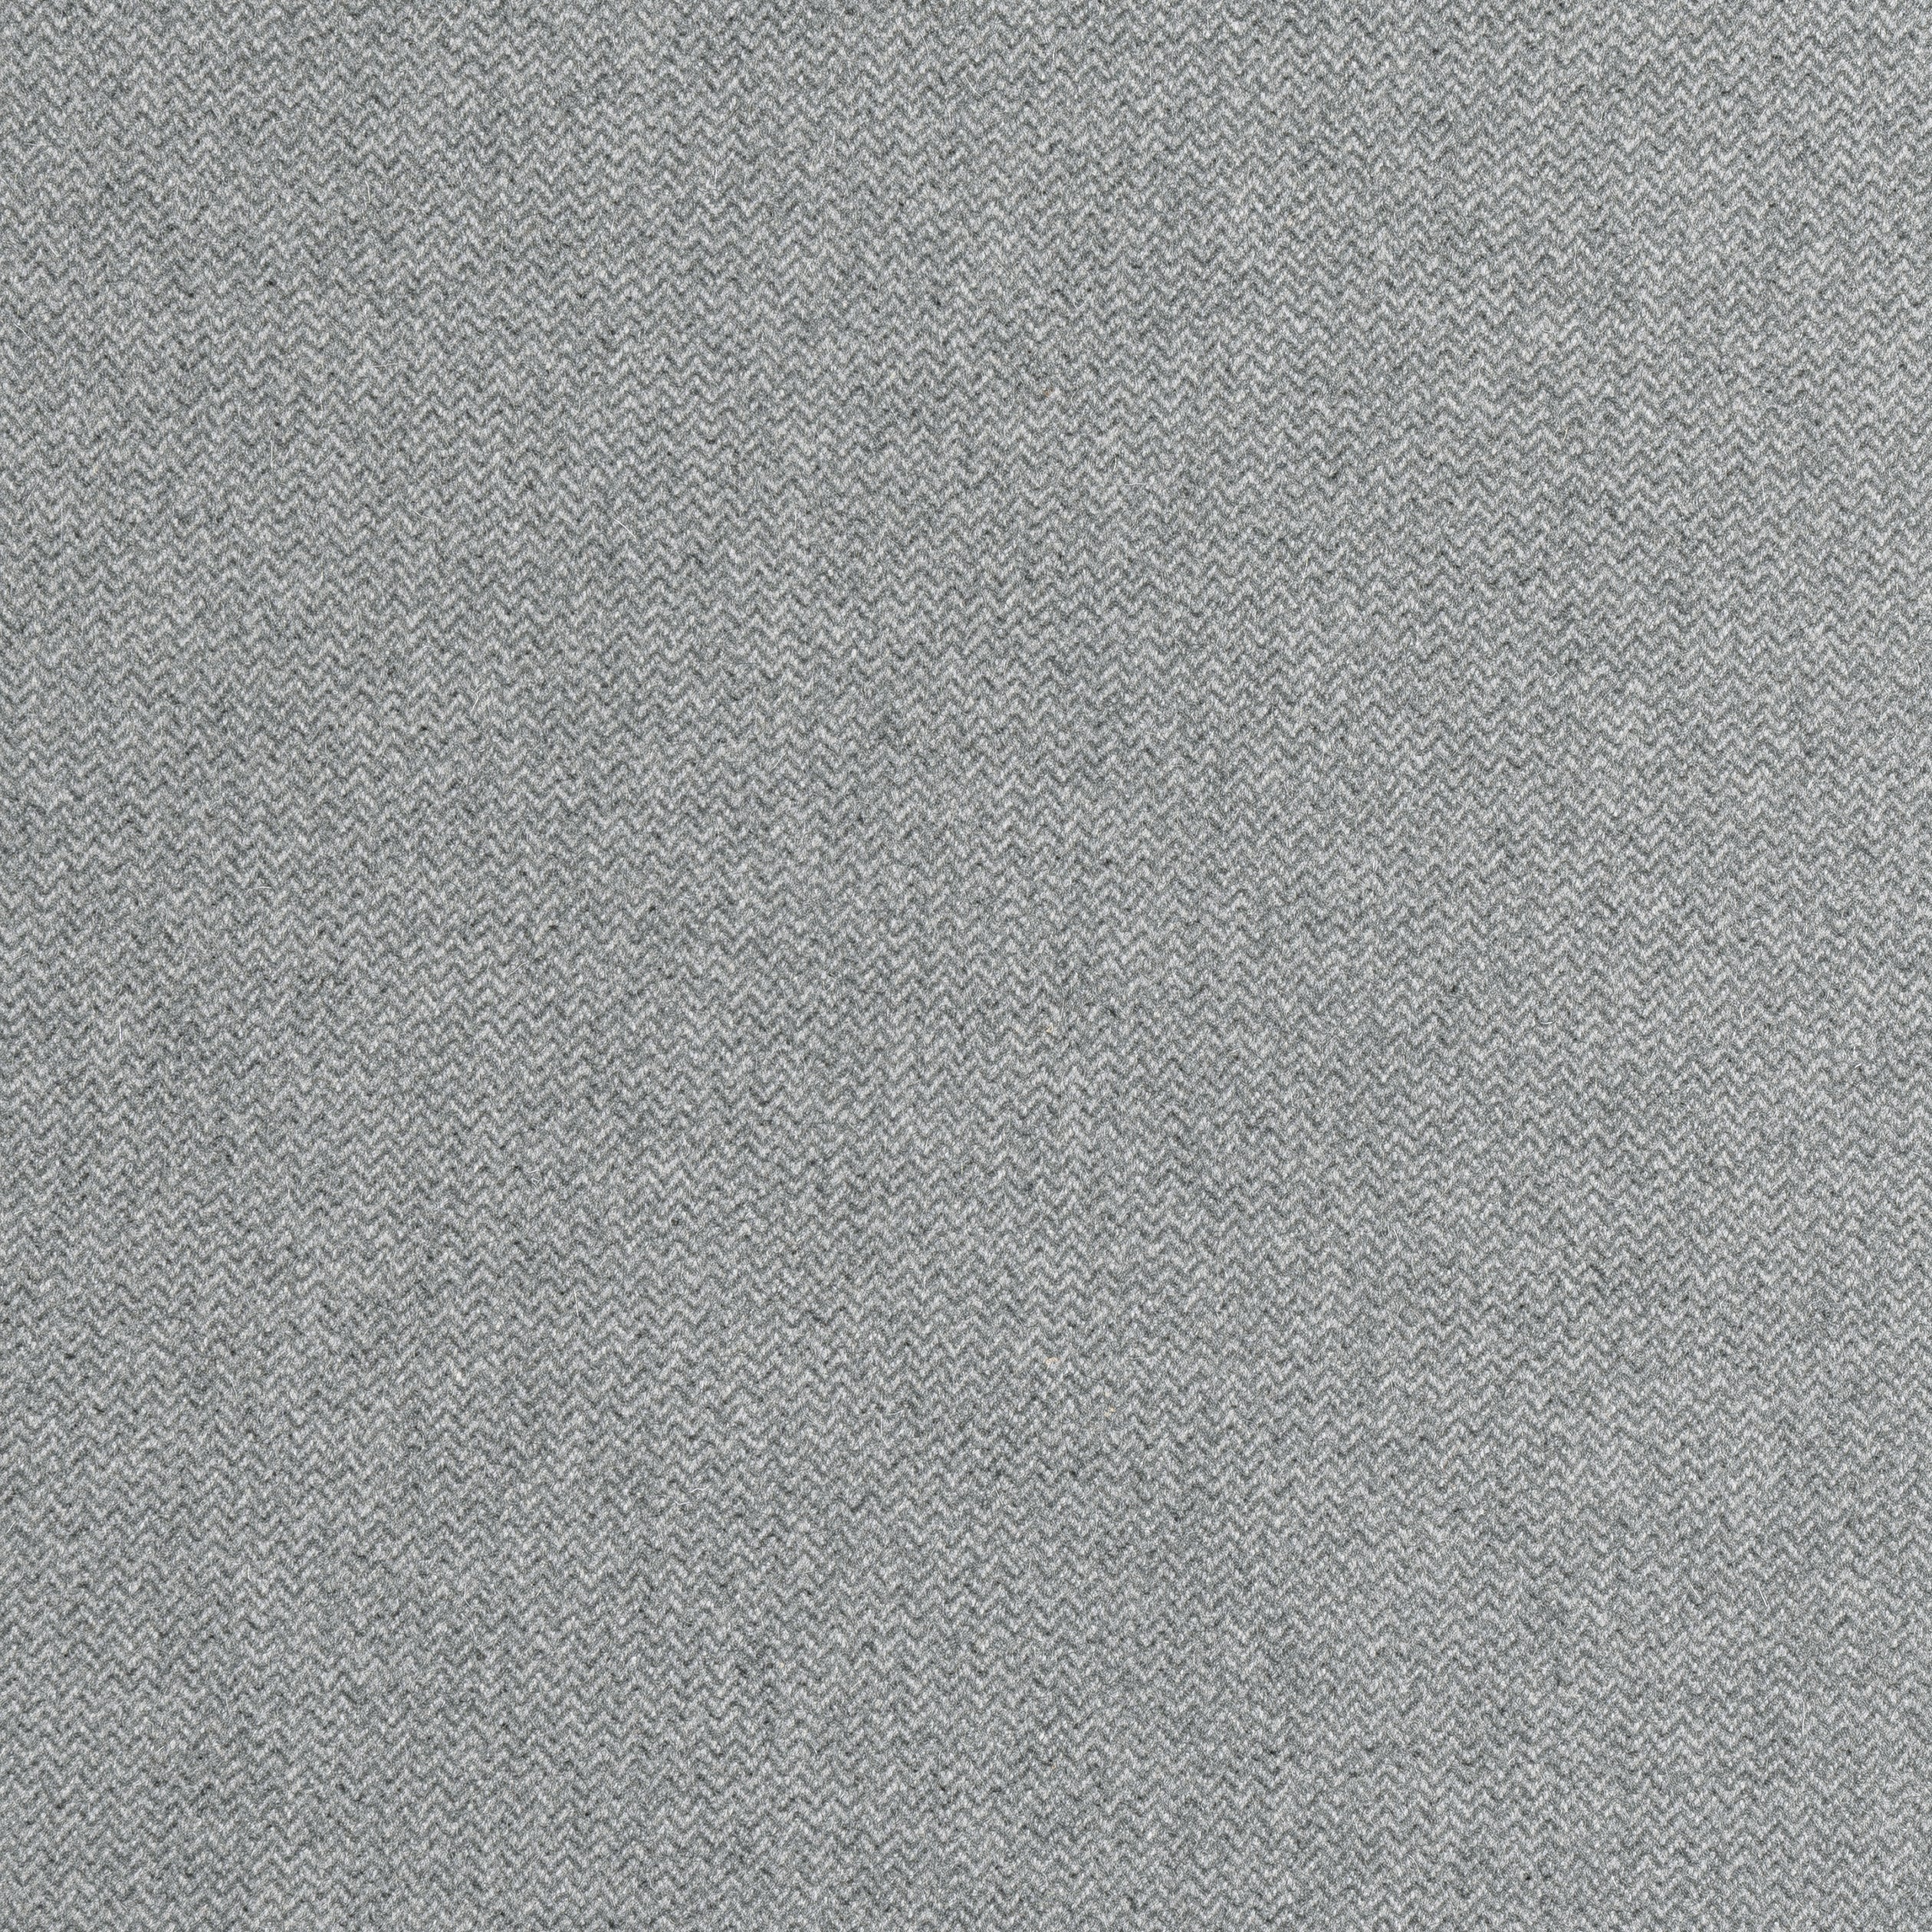 Dorset fabric in zinc color - pattern number W80916 - by Thibaut in the Dunmore collection